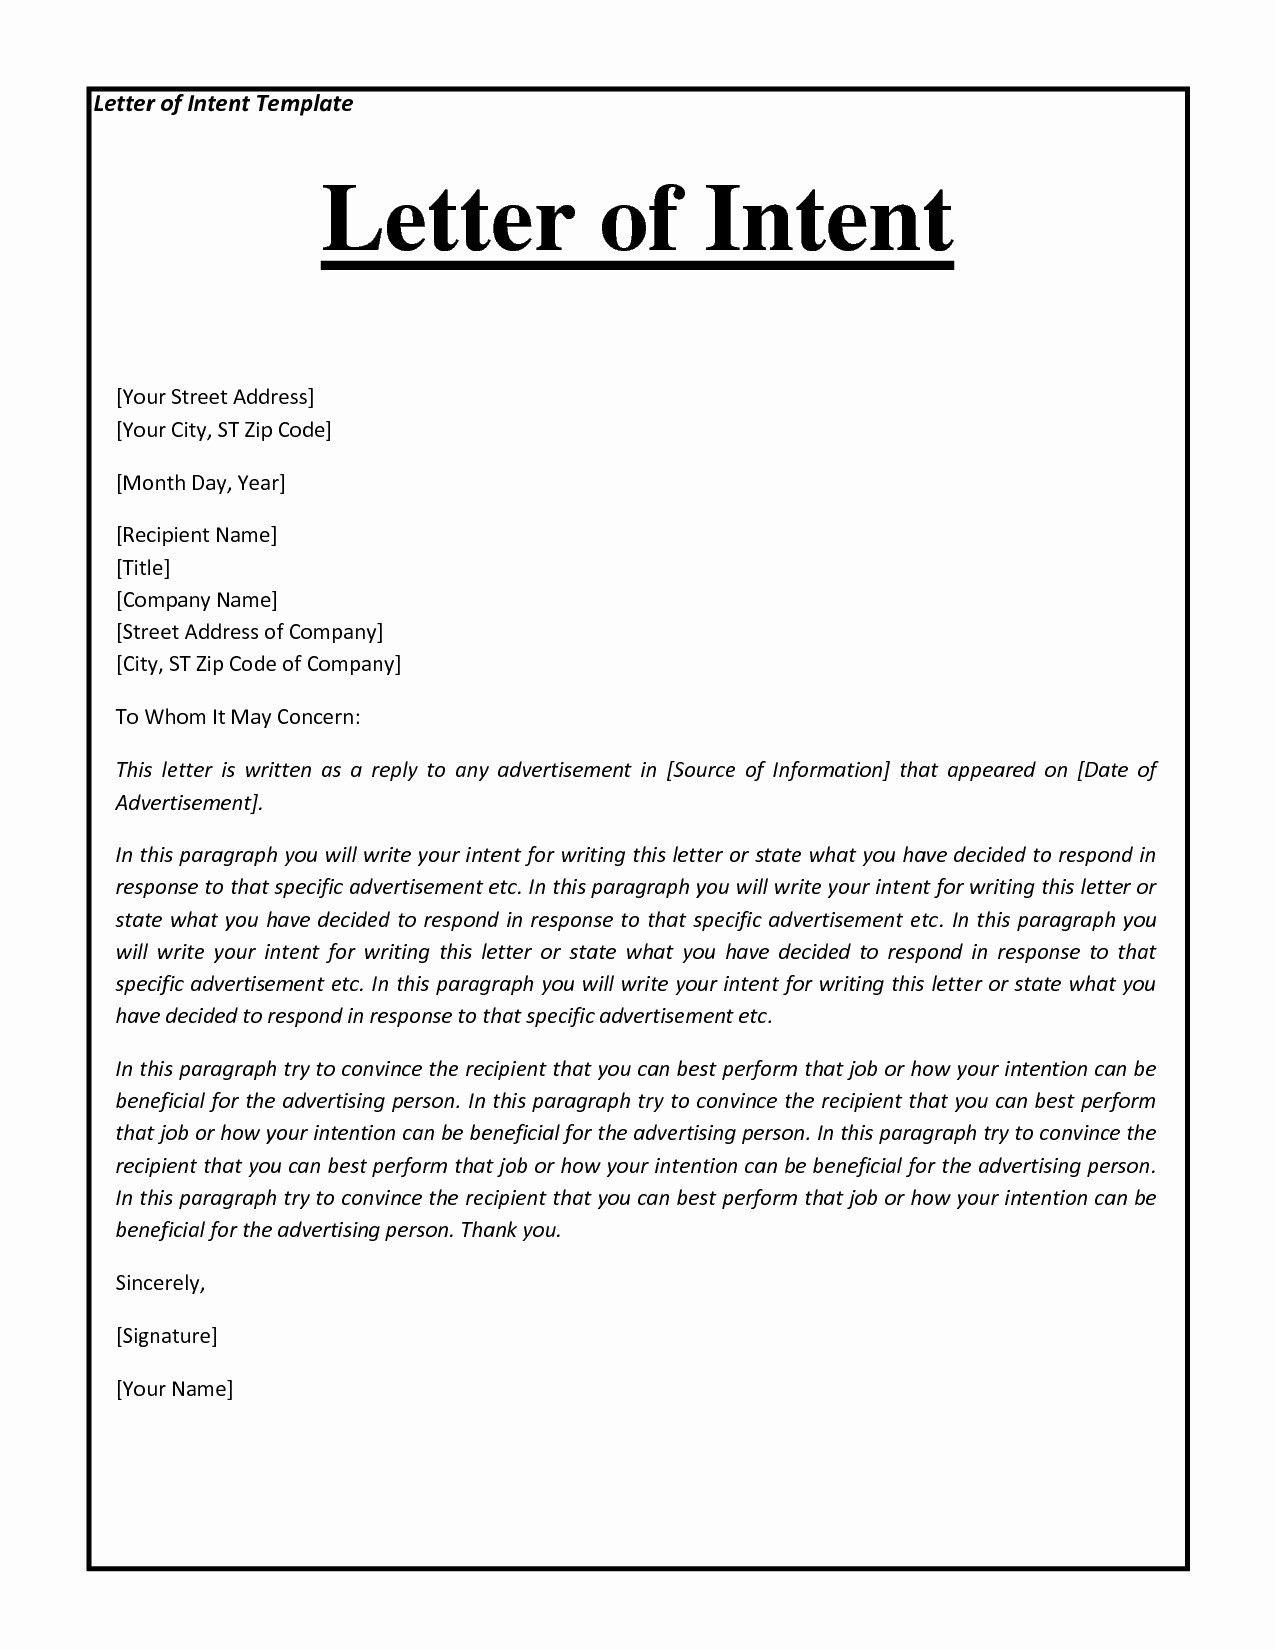 Letter Of Intent For Business from simpleartifact.com